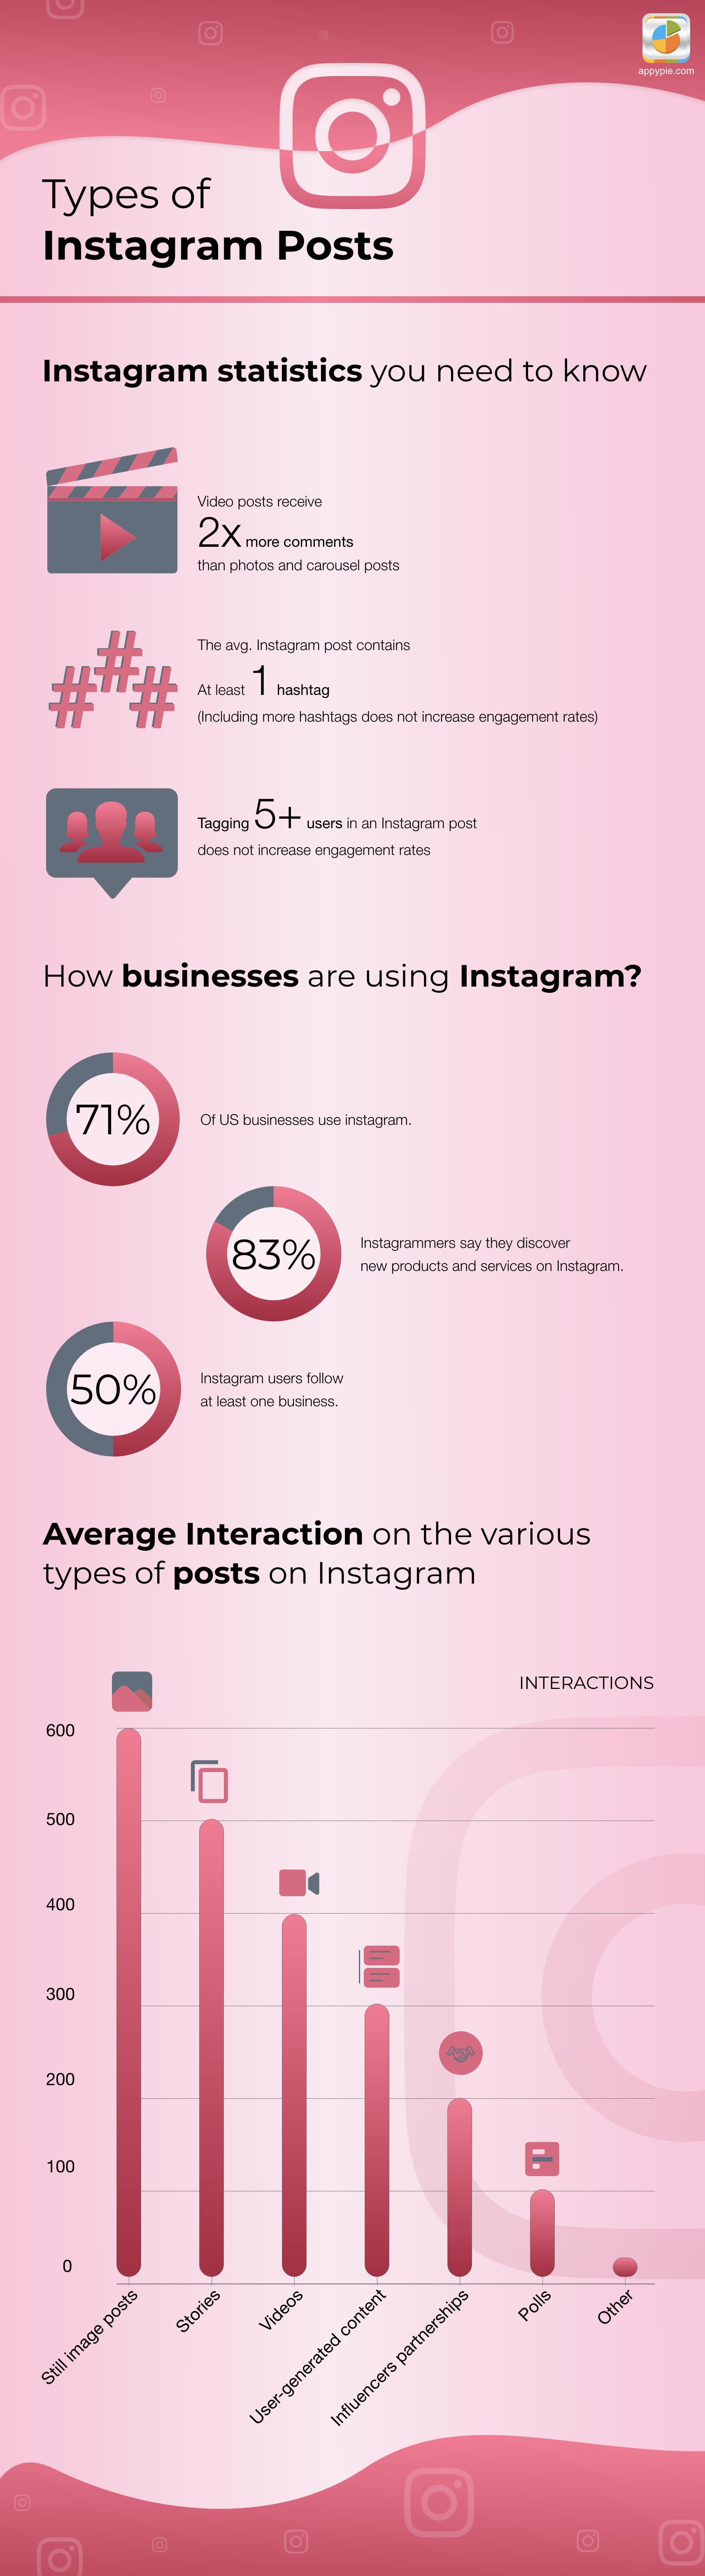 8 Types of Instagram Posts Every Business Should Upload